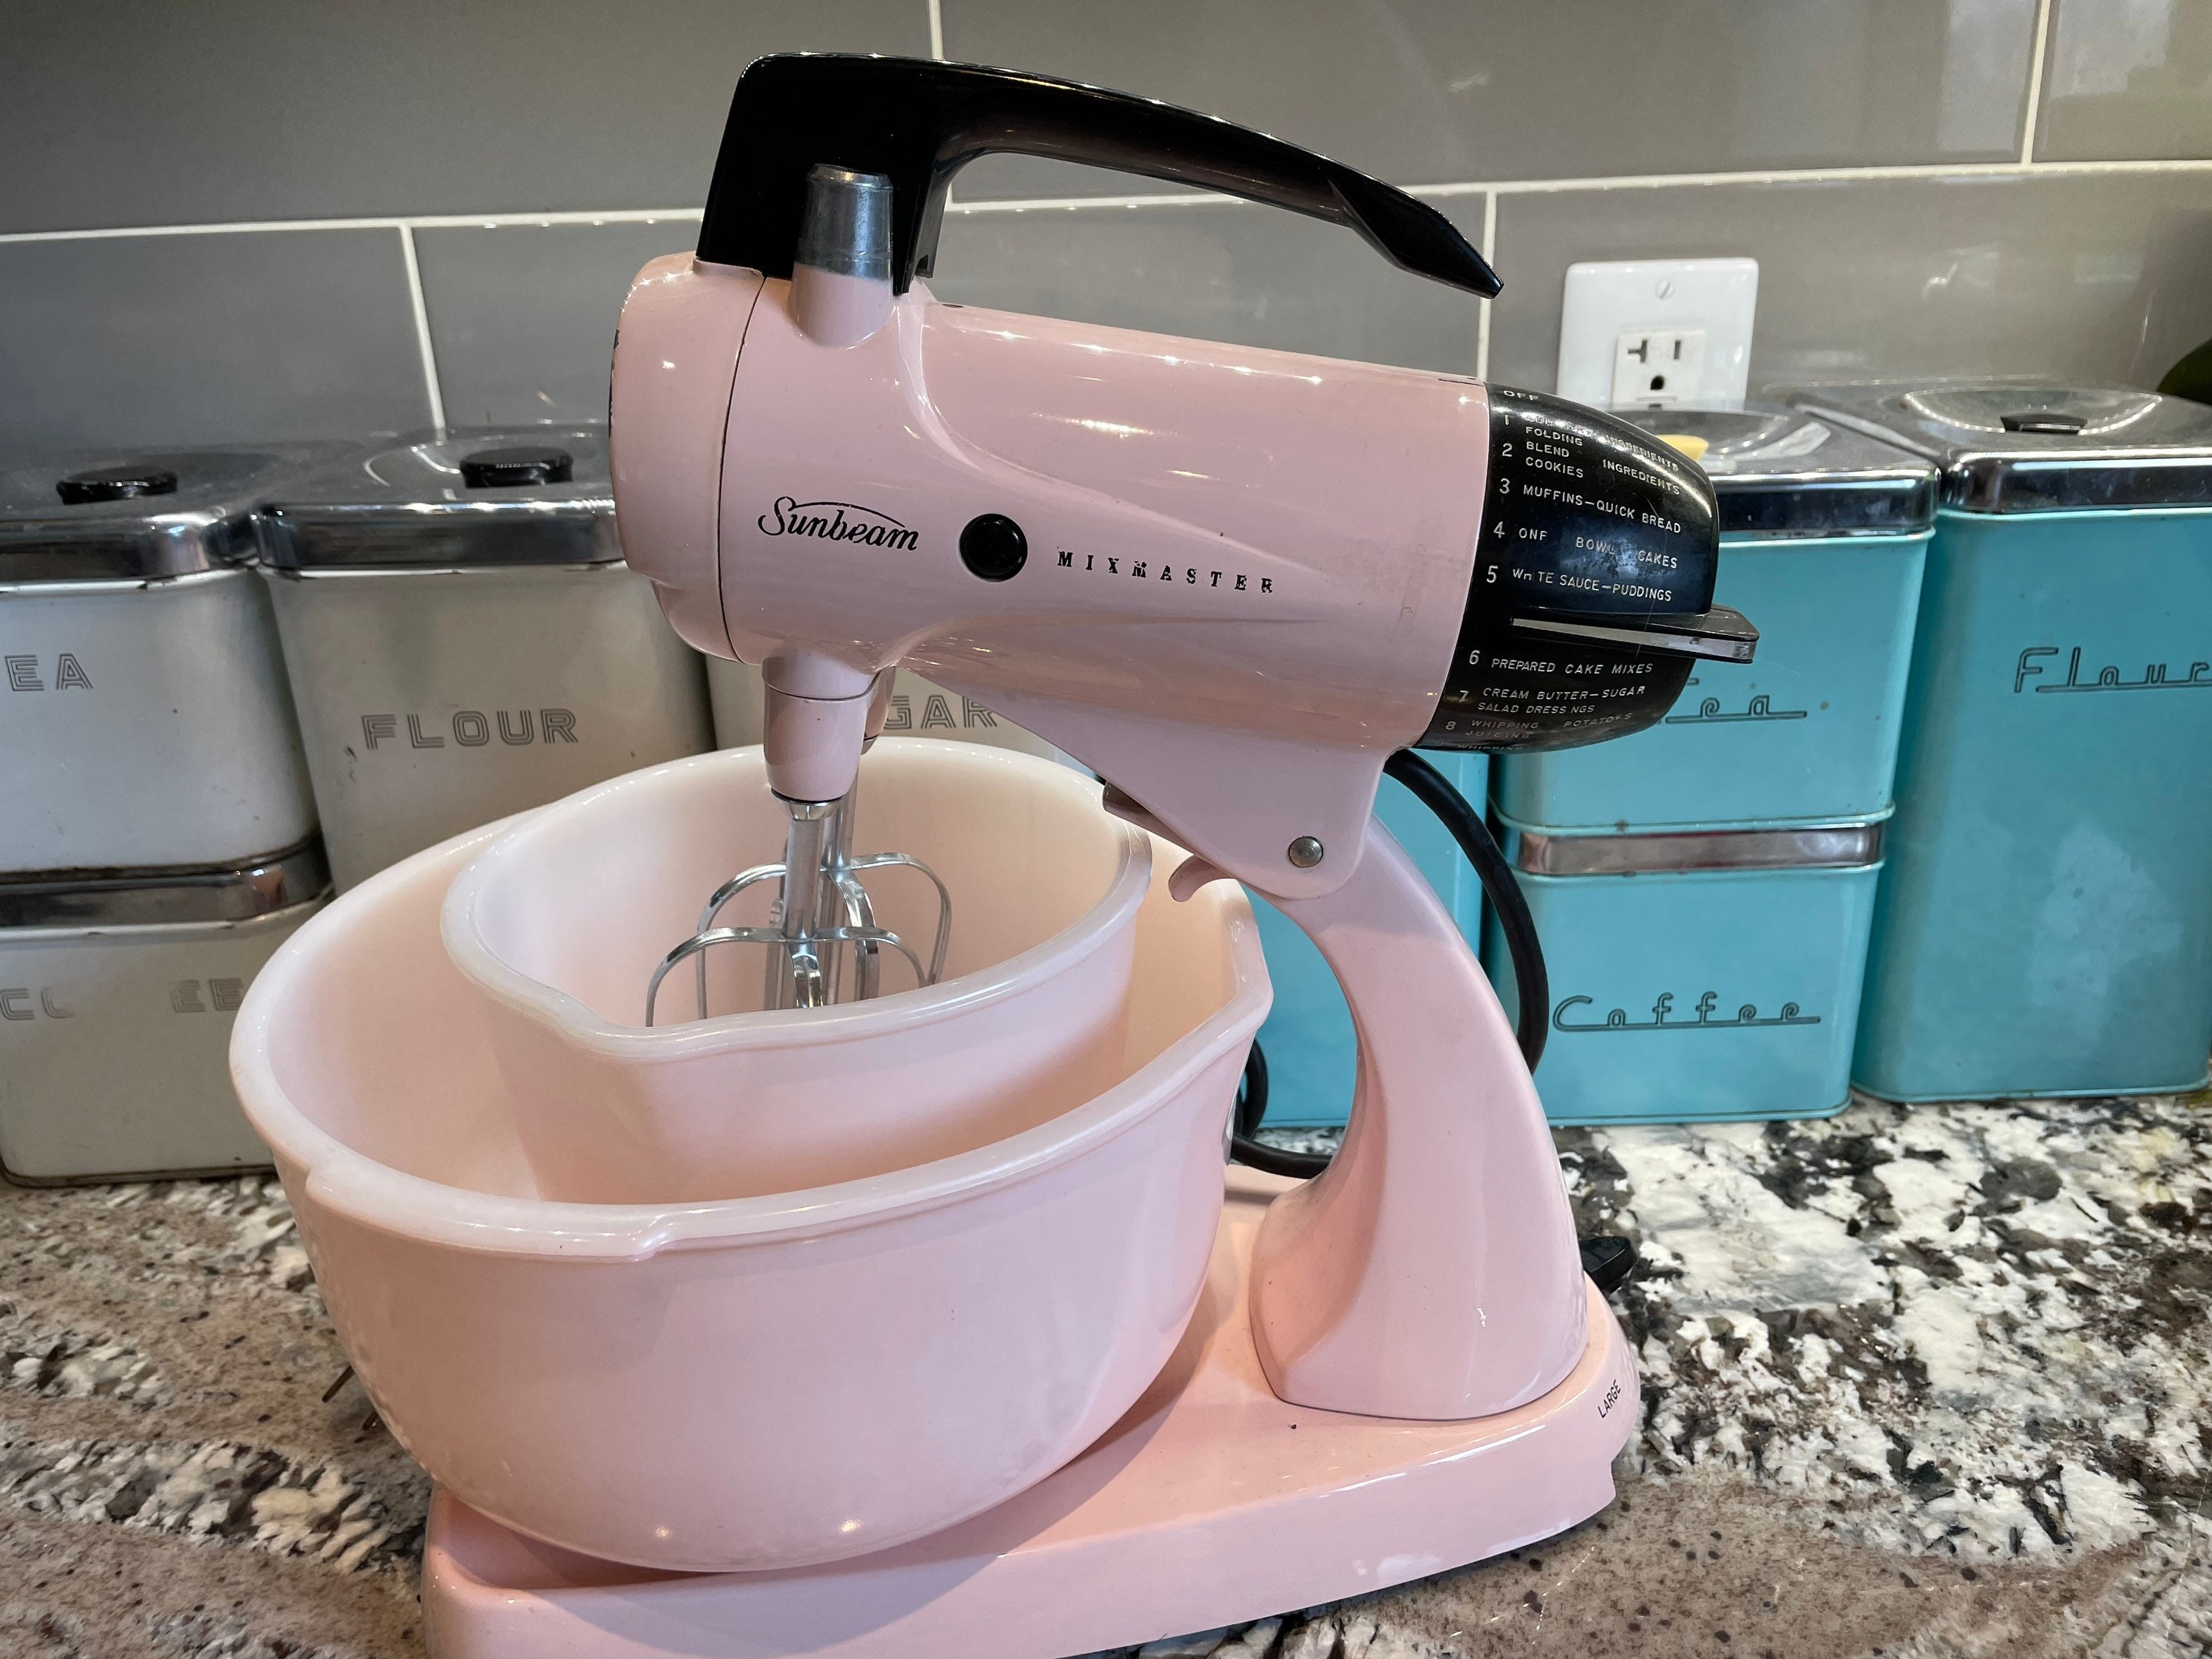 Vintage White Sunbeam Stand Mixer - Gil & Roy Props